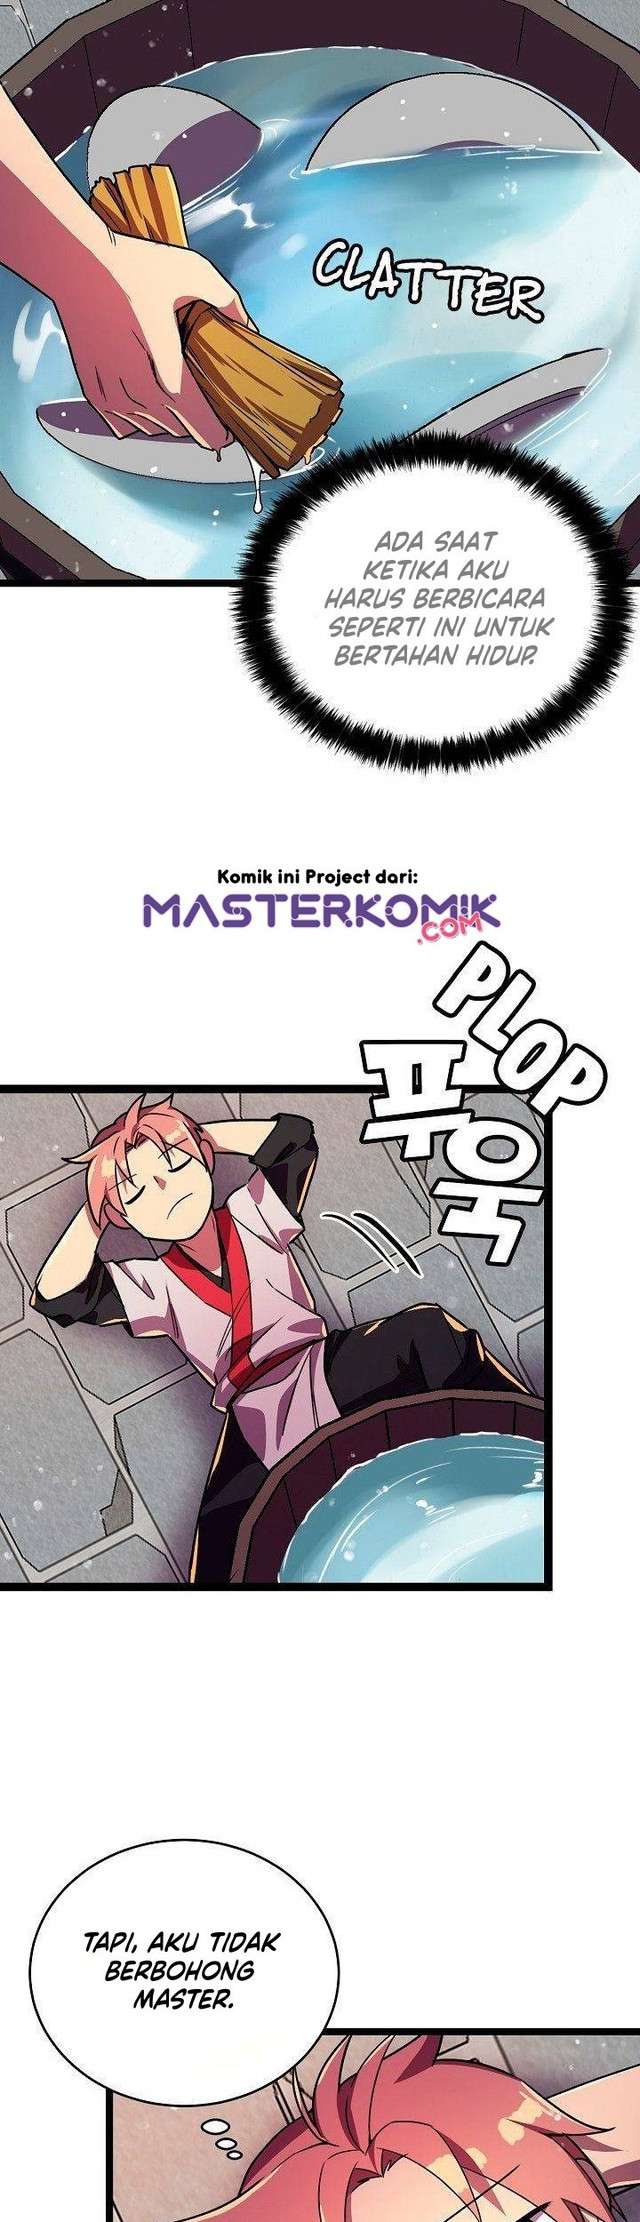 Absolute Martial Arts Chapter 8